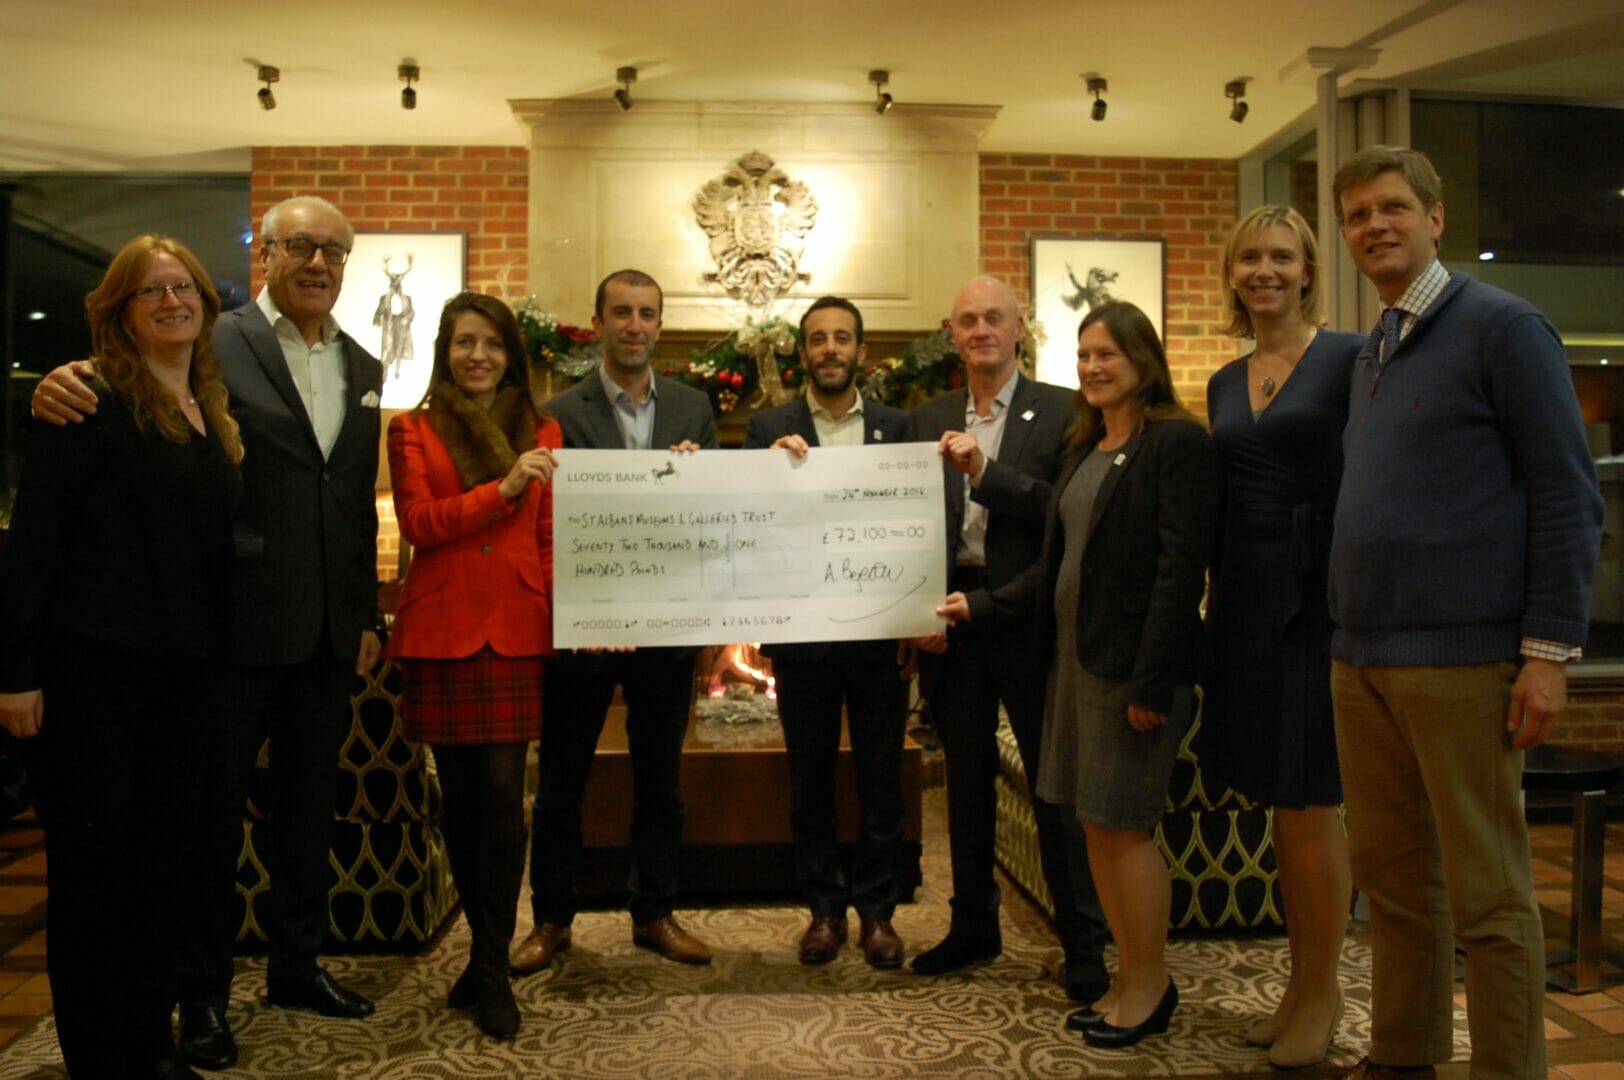 Sopwell House Raises £72,100 for Local Charity